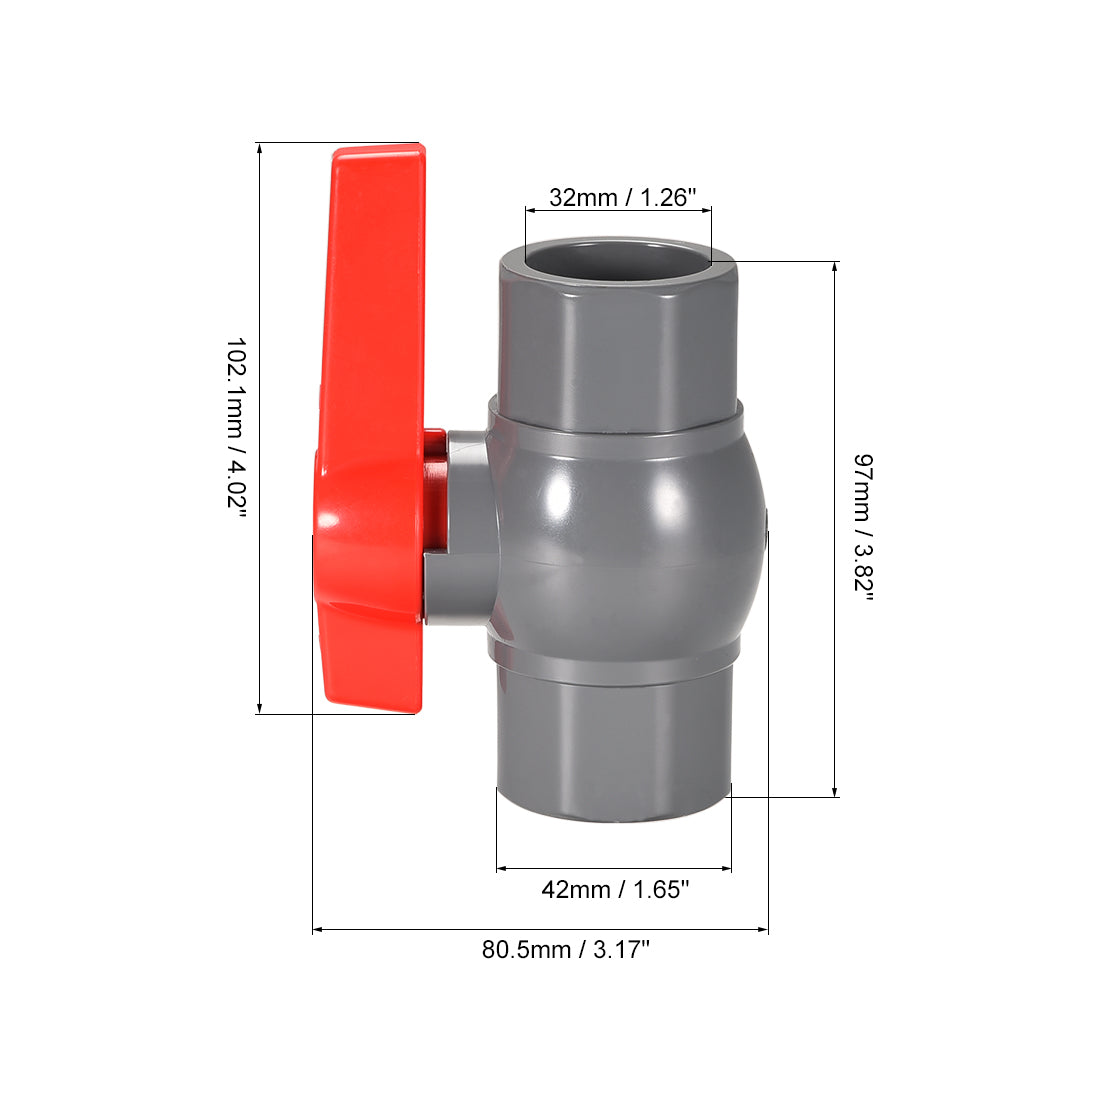 uxcell Uxcell Ball Valve, Socket Type, for Control Water Flow, PVC